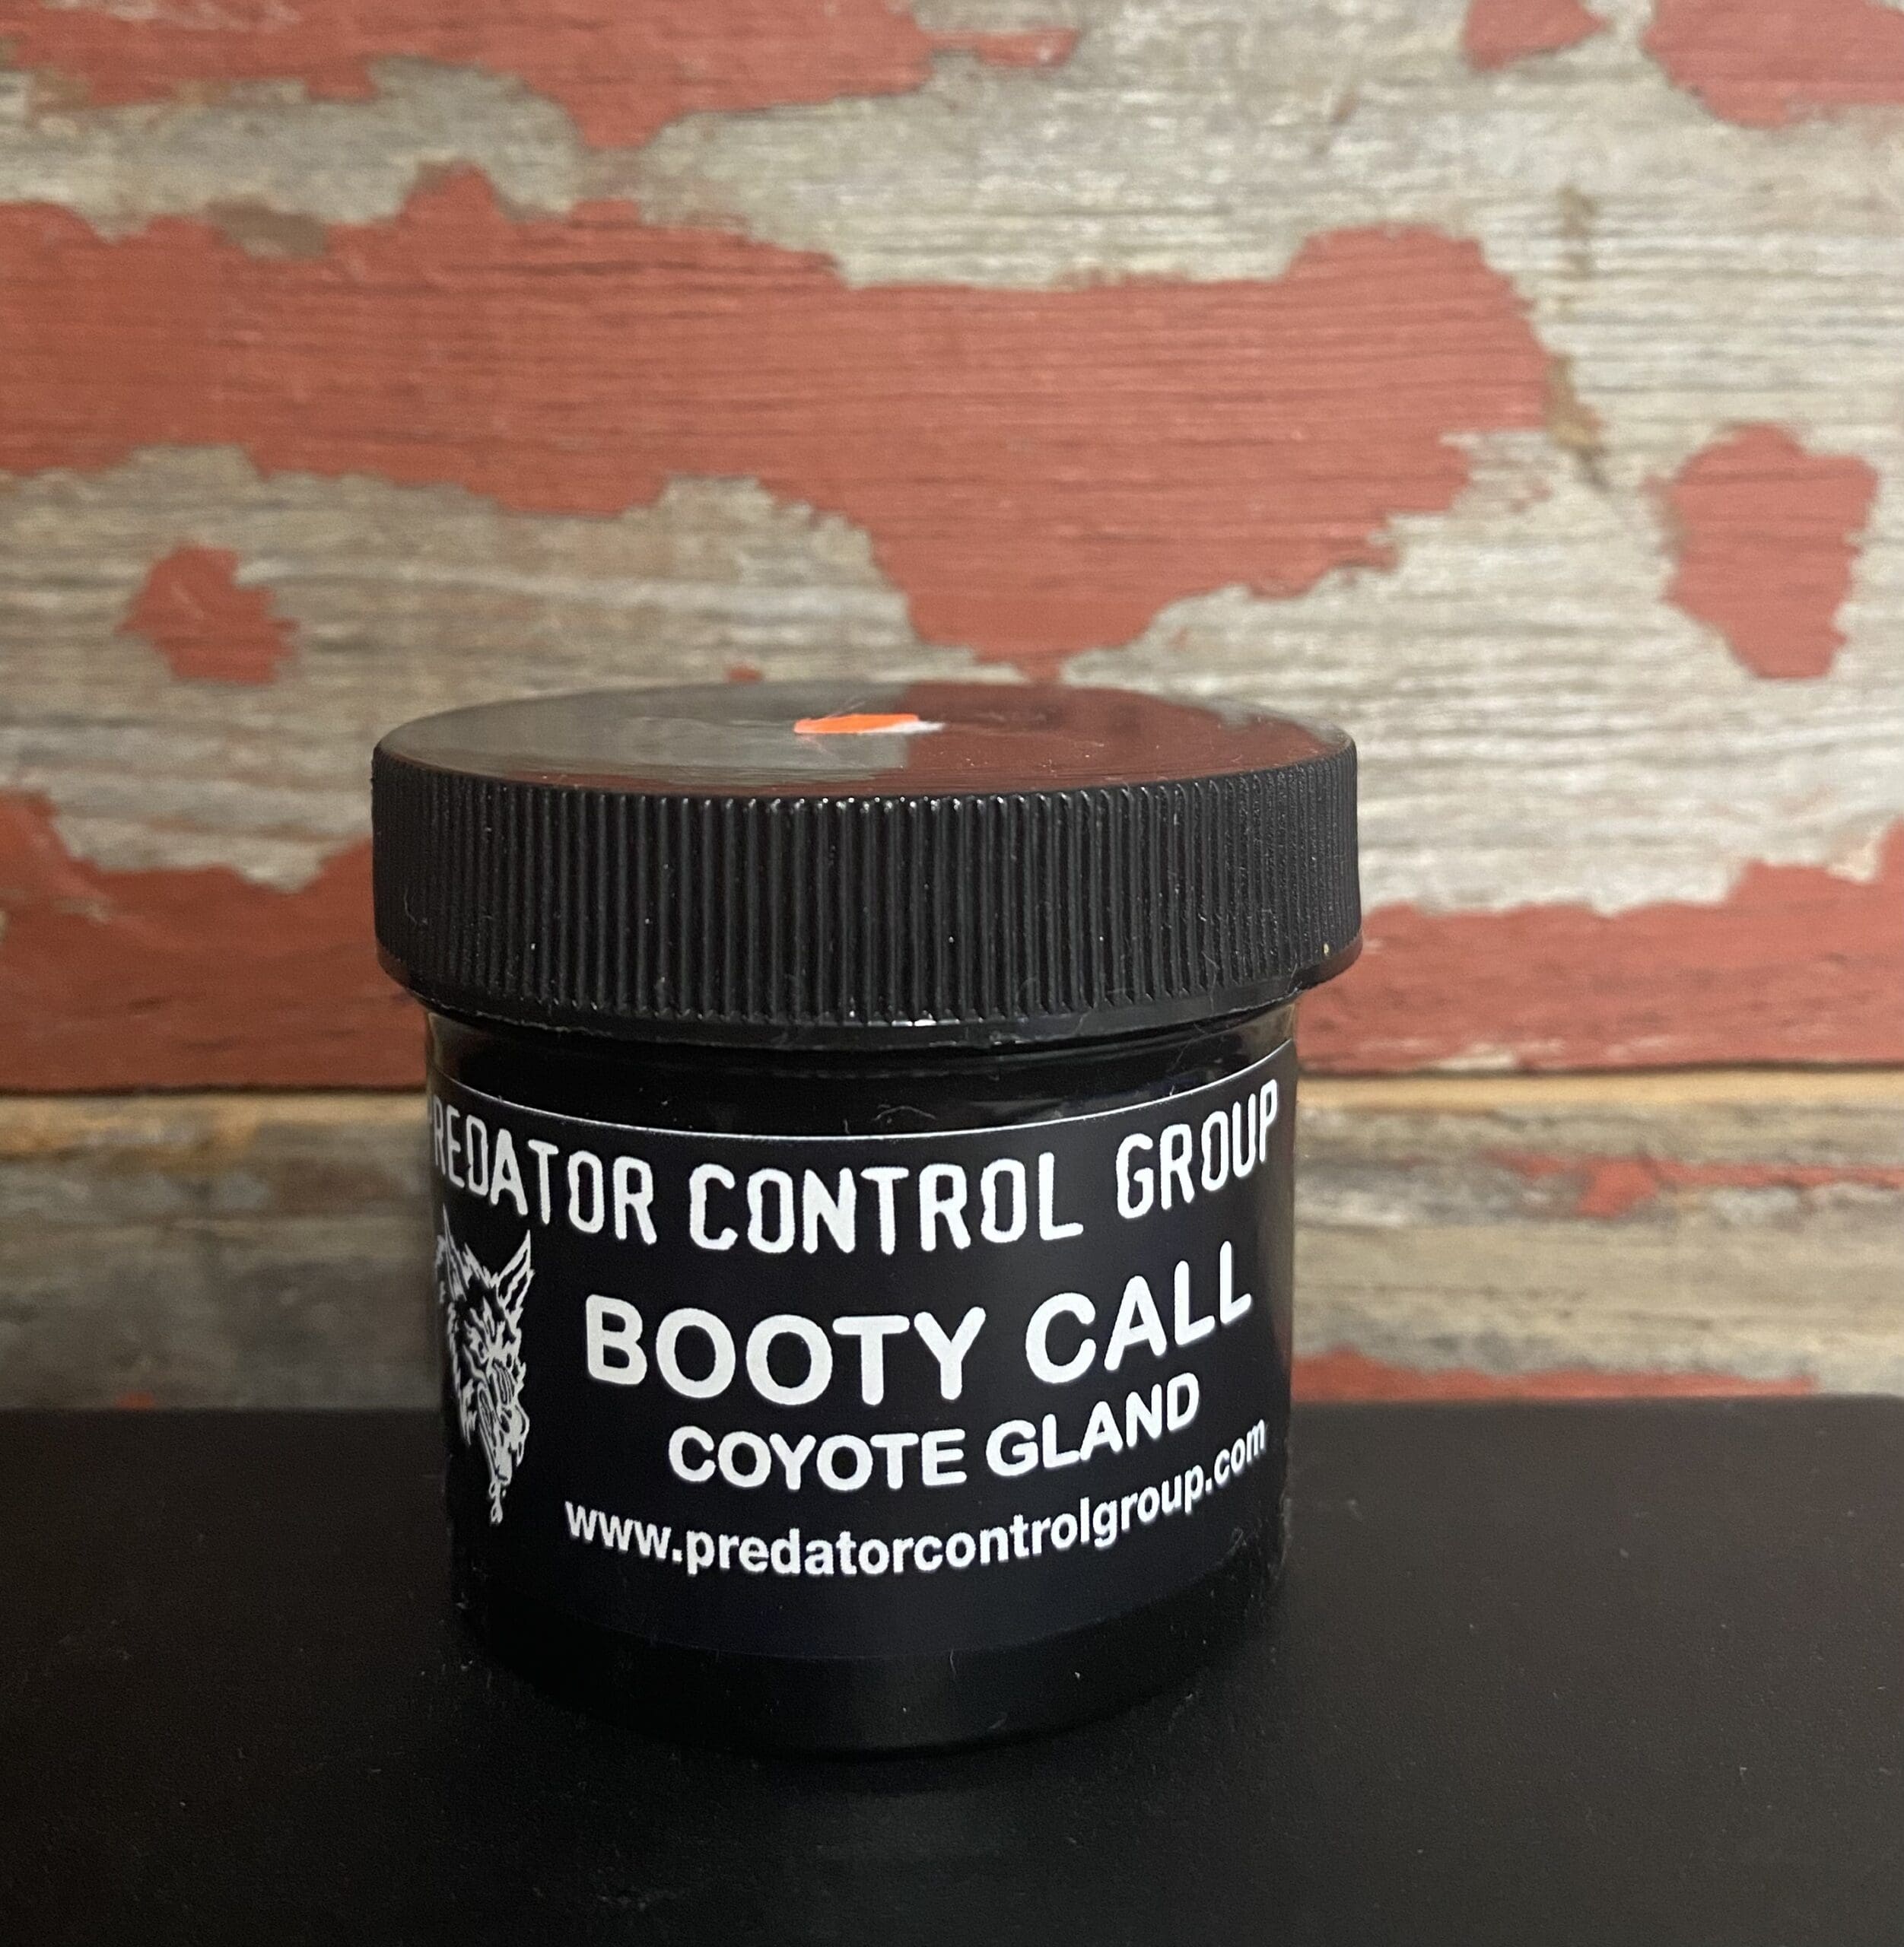 Coyote Gland, Booty Call, Coyote Lure